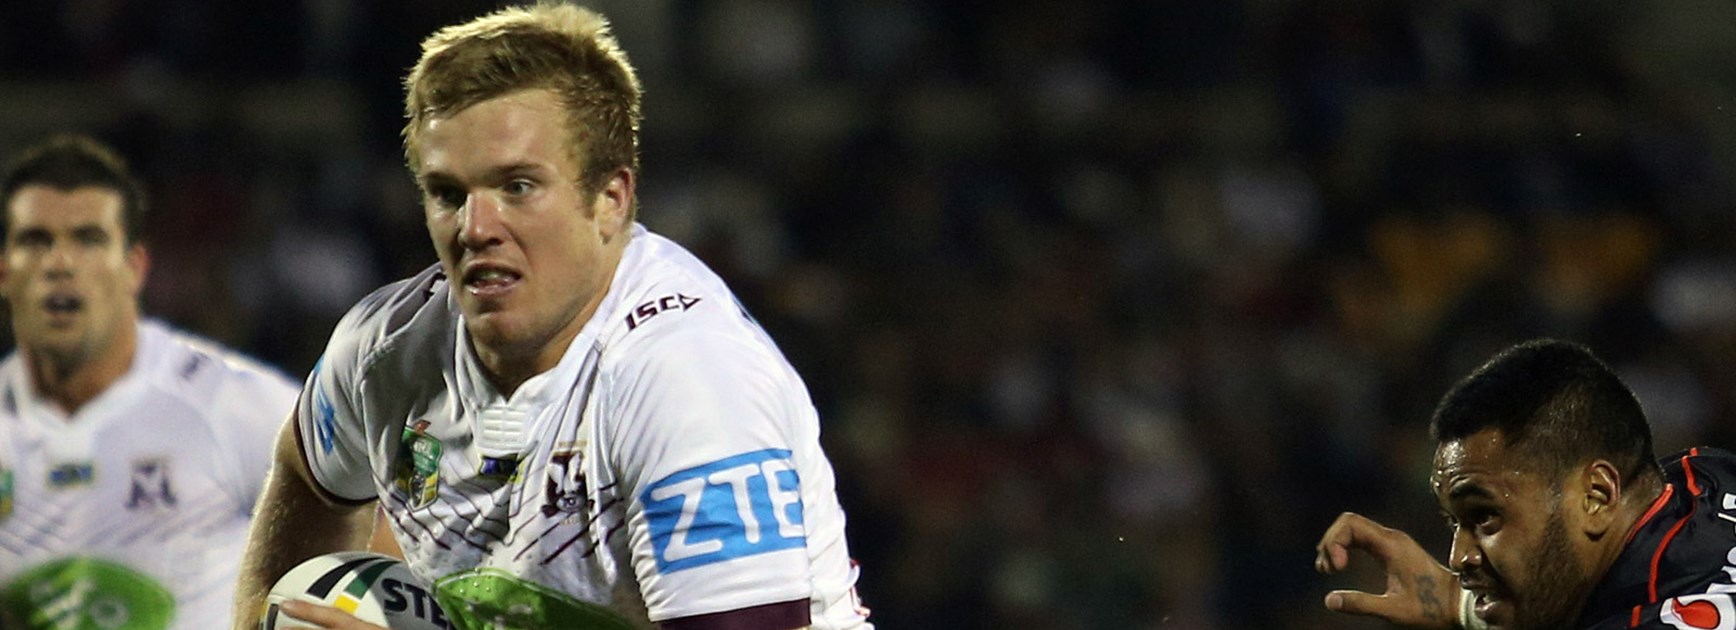 Jake Trbojevic made a successful return for the Sea Eagles in Round 6.